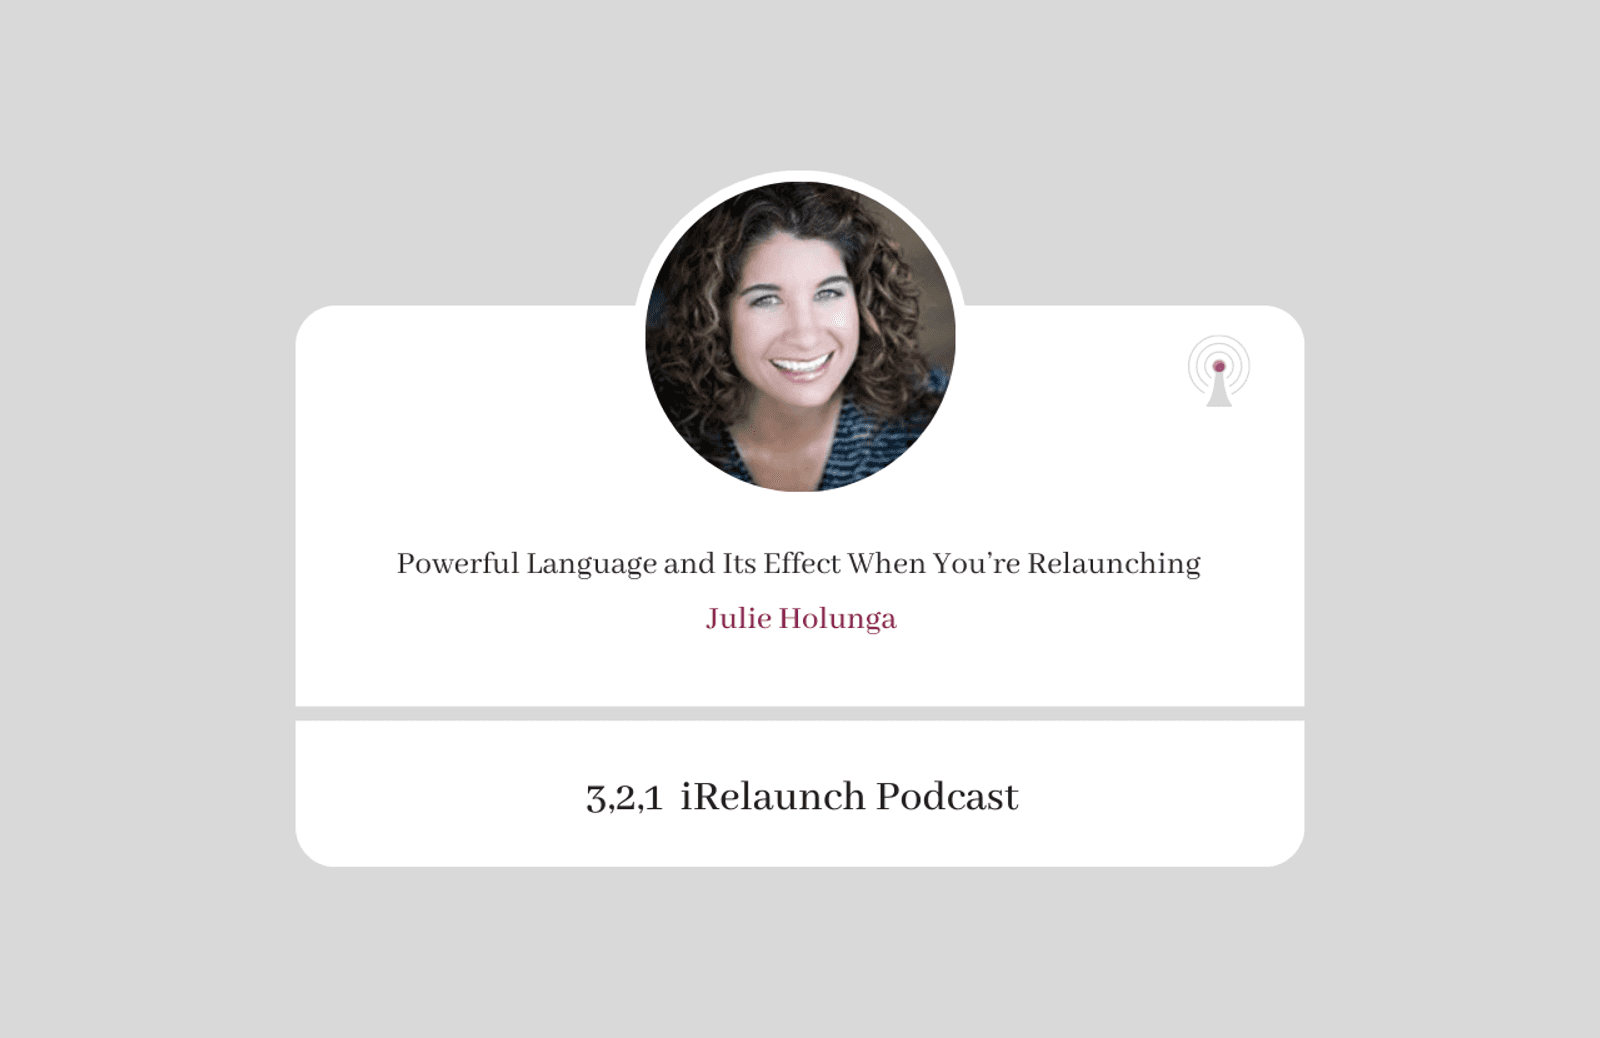 3, 2, 1 iRelaunch Podcast Thumbnail for Episode #33 with Julie Holunga's headshot. The episode's title is: "Powerful Language and Its Effect When You’re Relaunching."